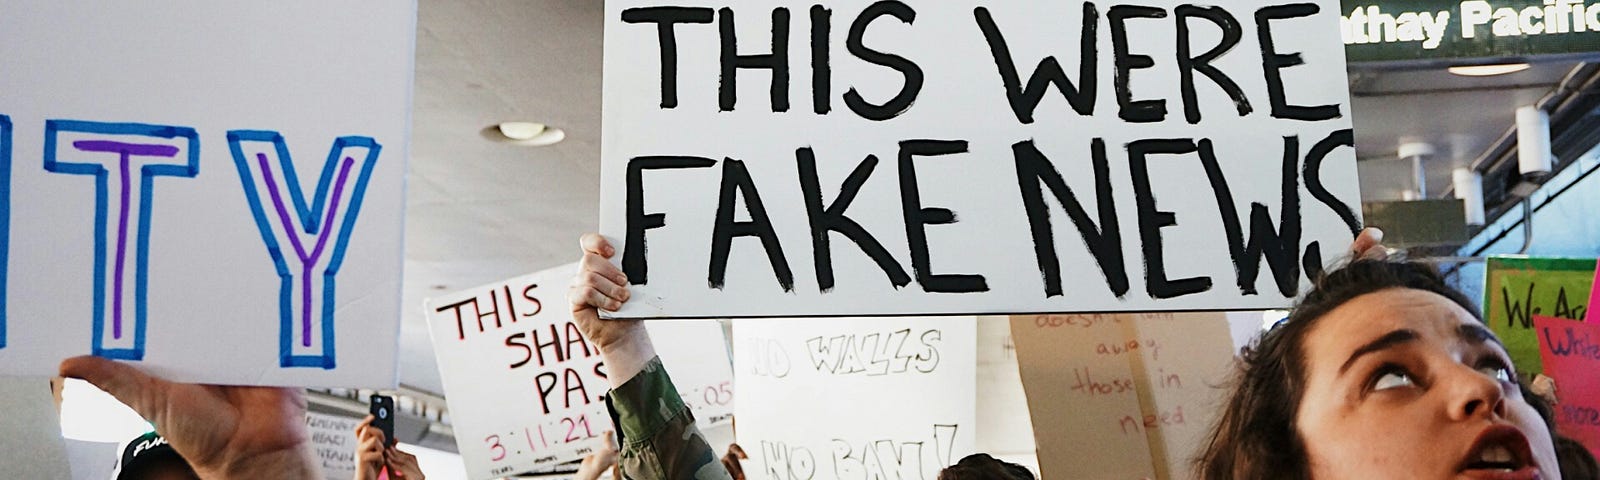 Photo of protesters with “I wish this were fake news” sign